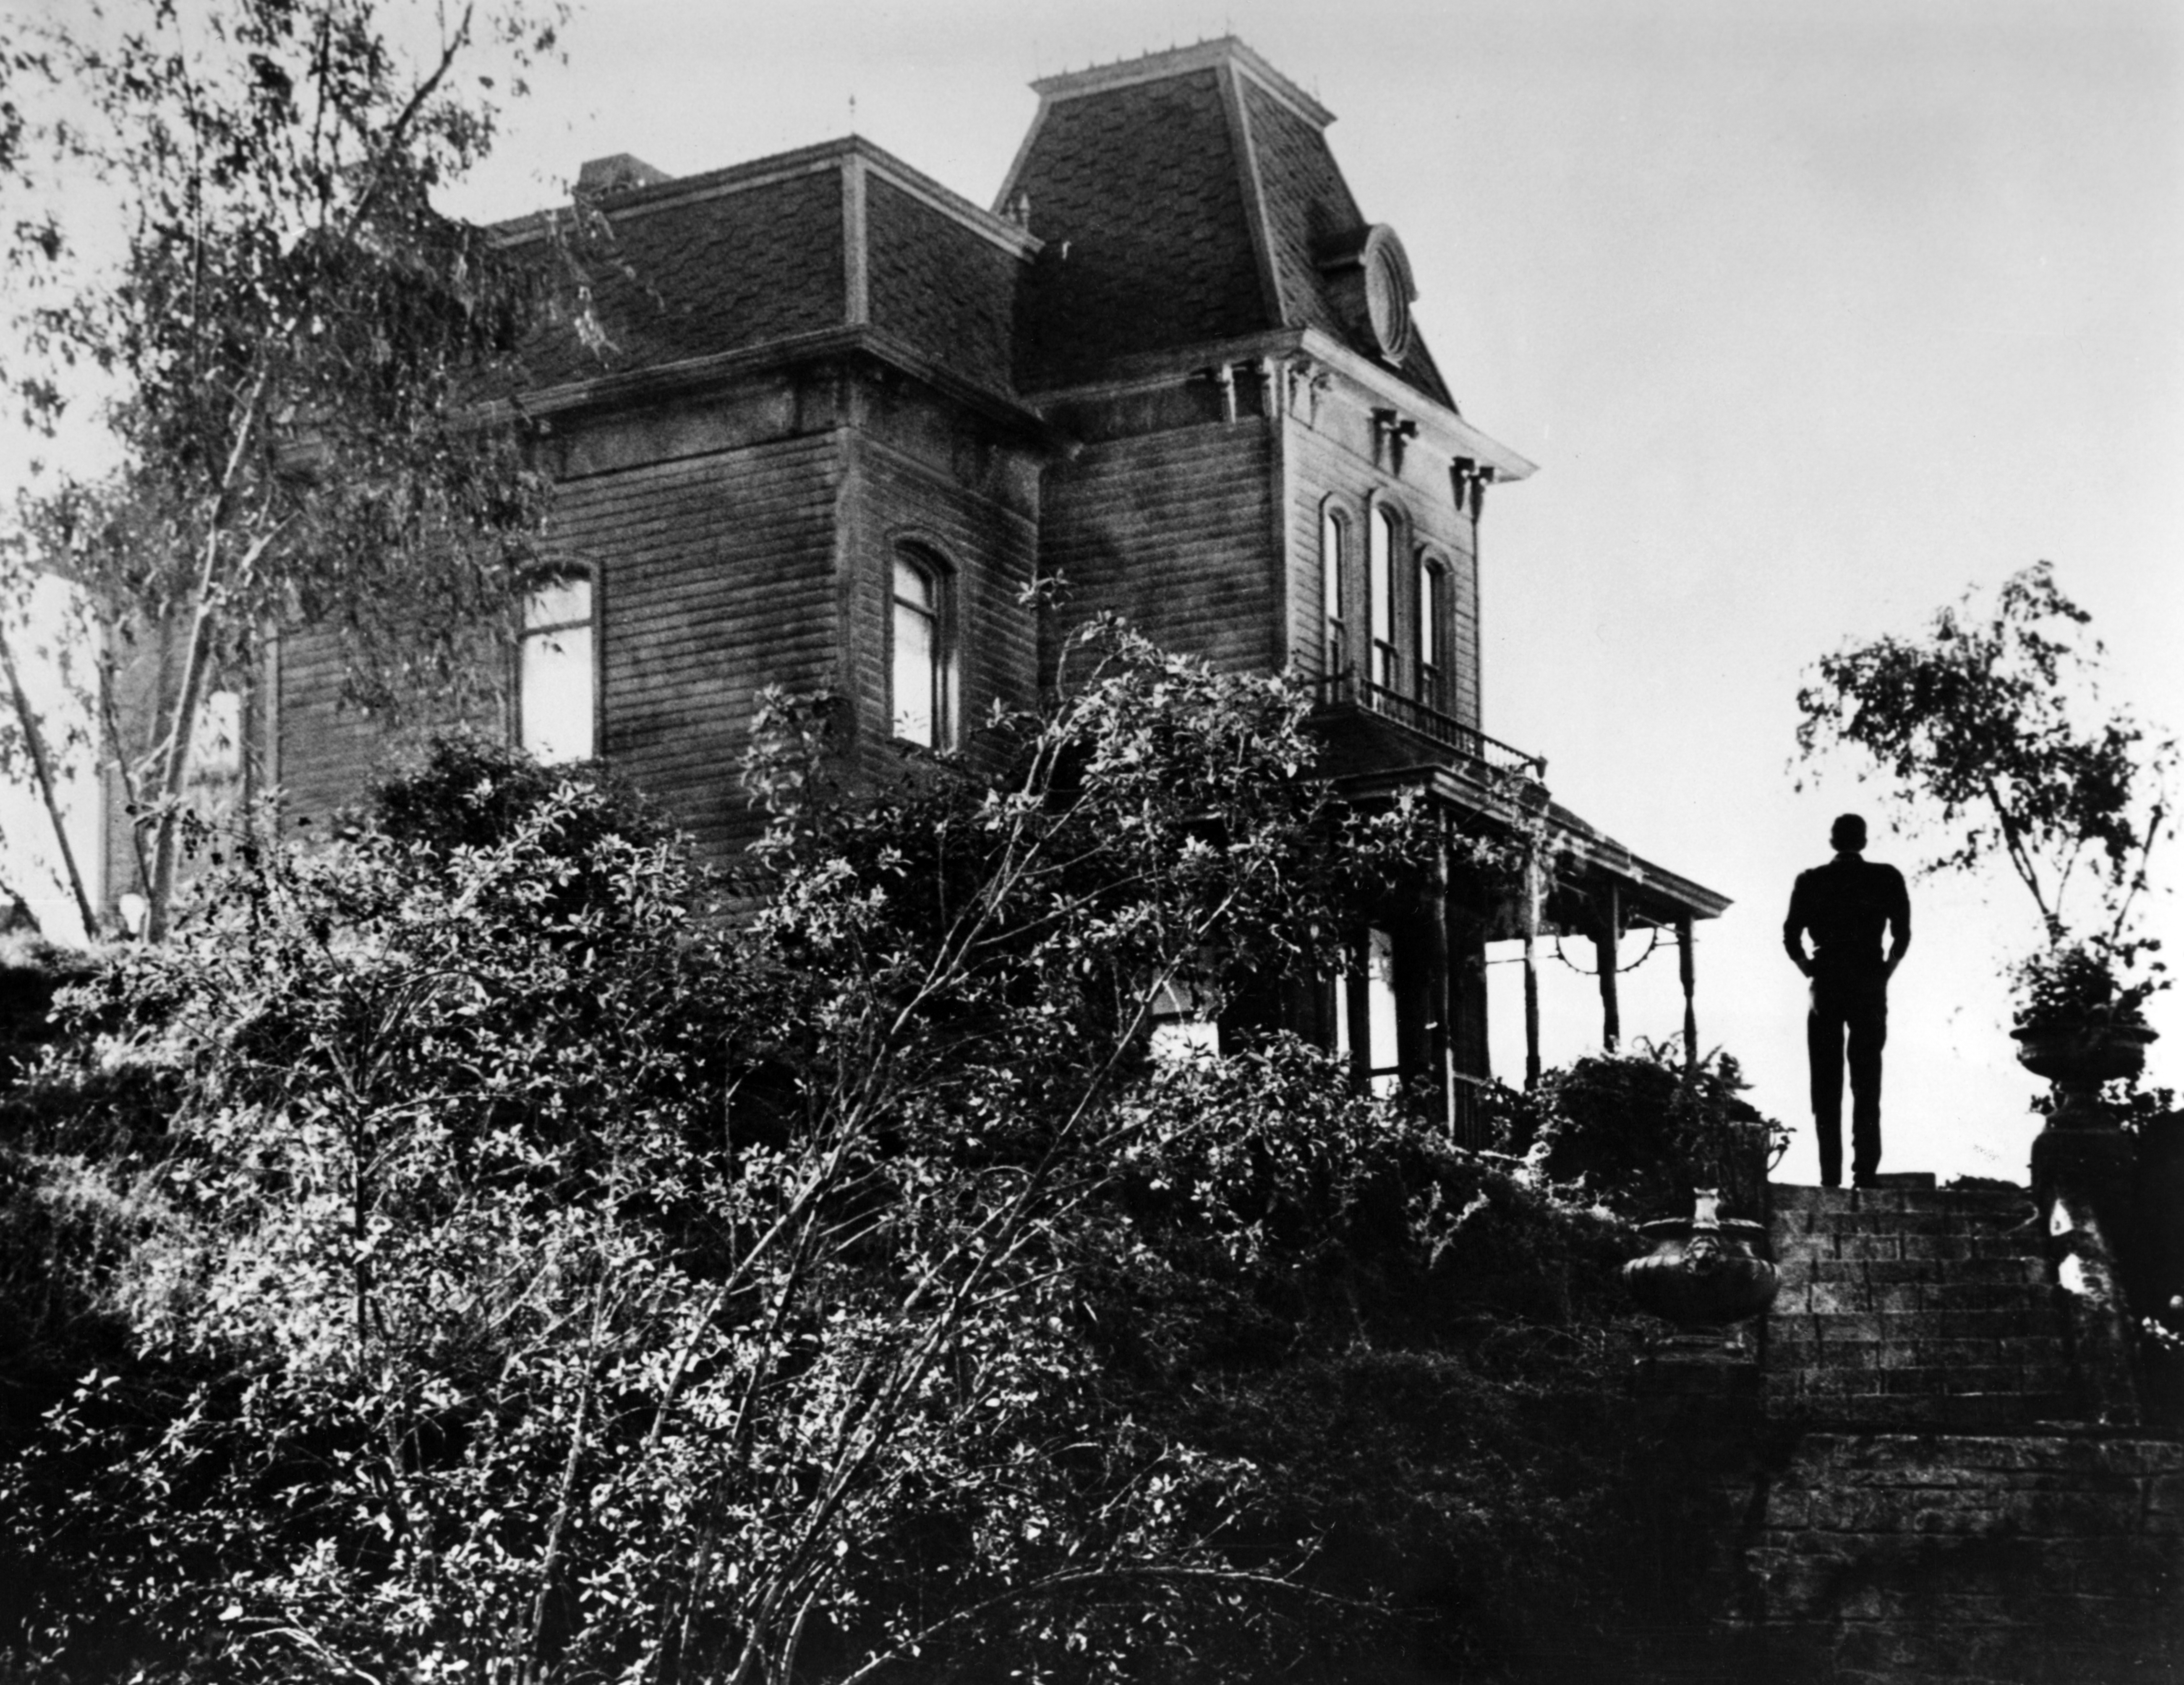 Anthony Perkins in Psycho (1960)